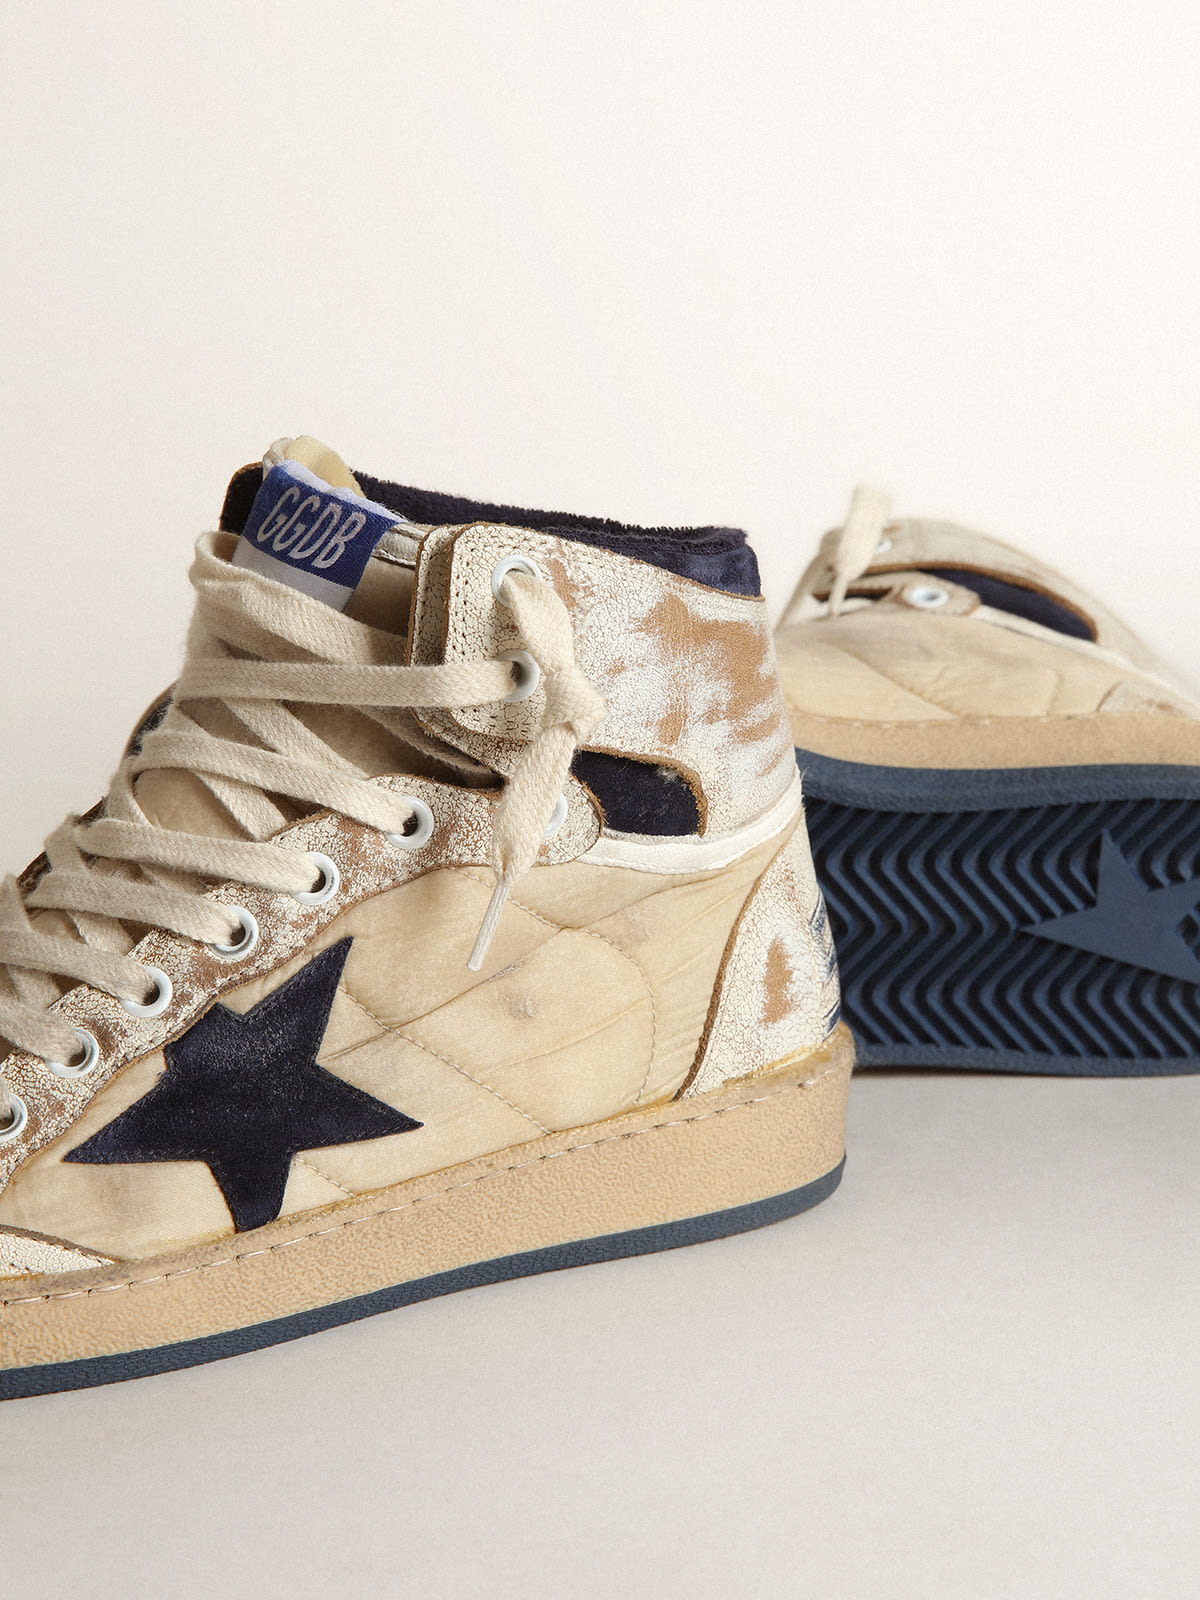 Golden Goose - Women's Sky-Star in cream-colored nylon and white leather in 